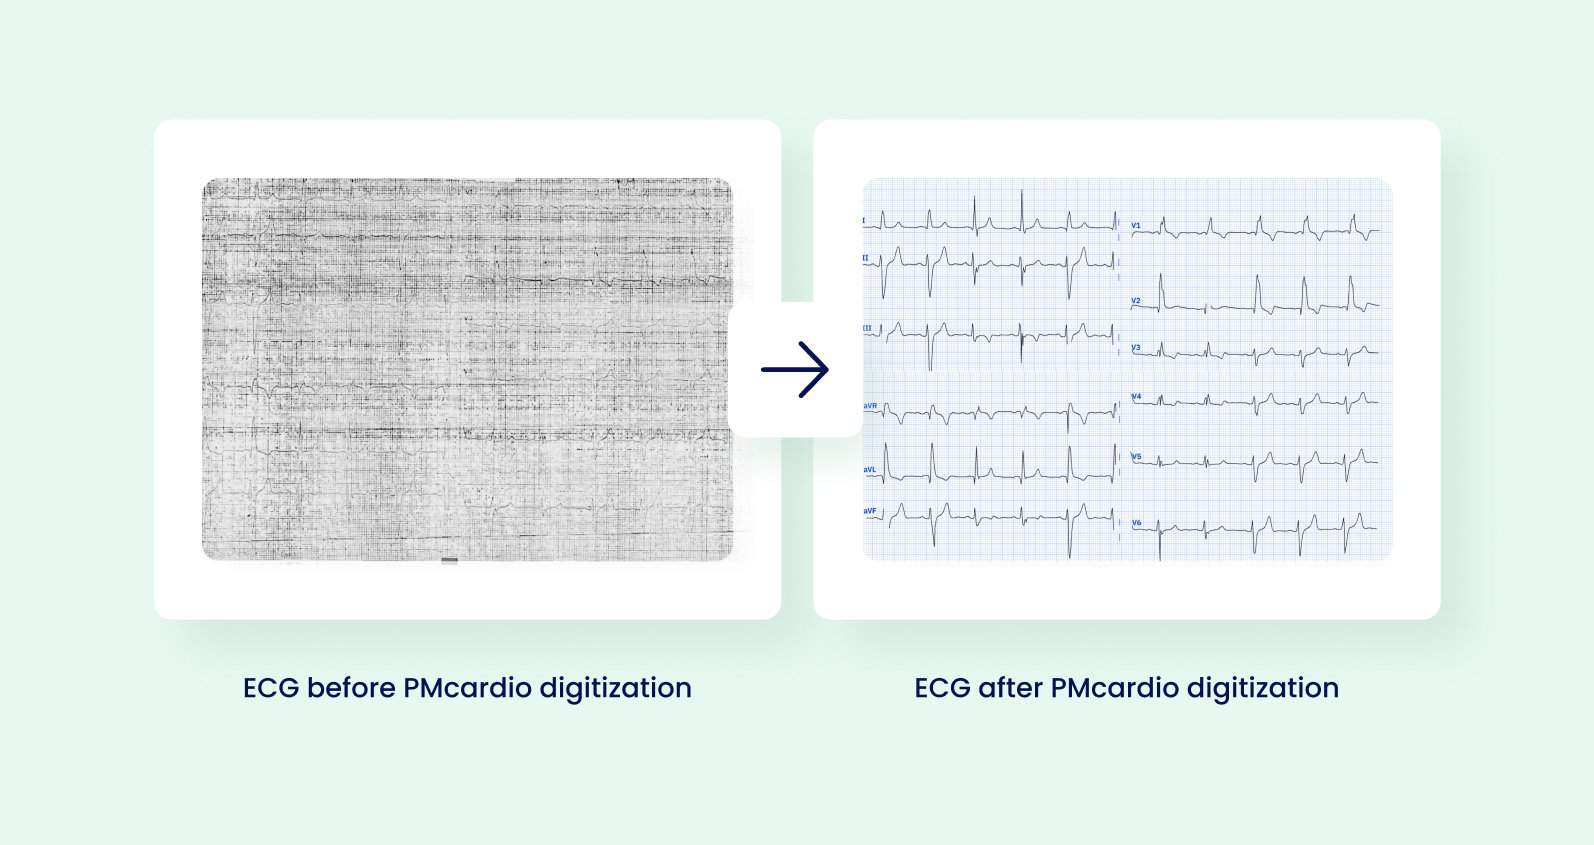 An image of an old, poor-quality ECG versus a digitized, straightened out ECG image enhanced by PMcardio